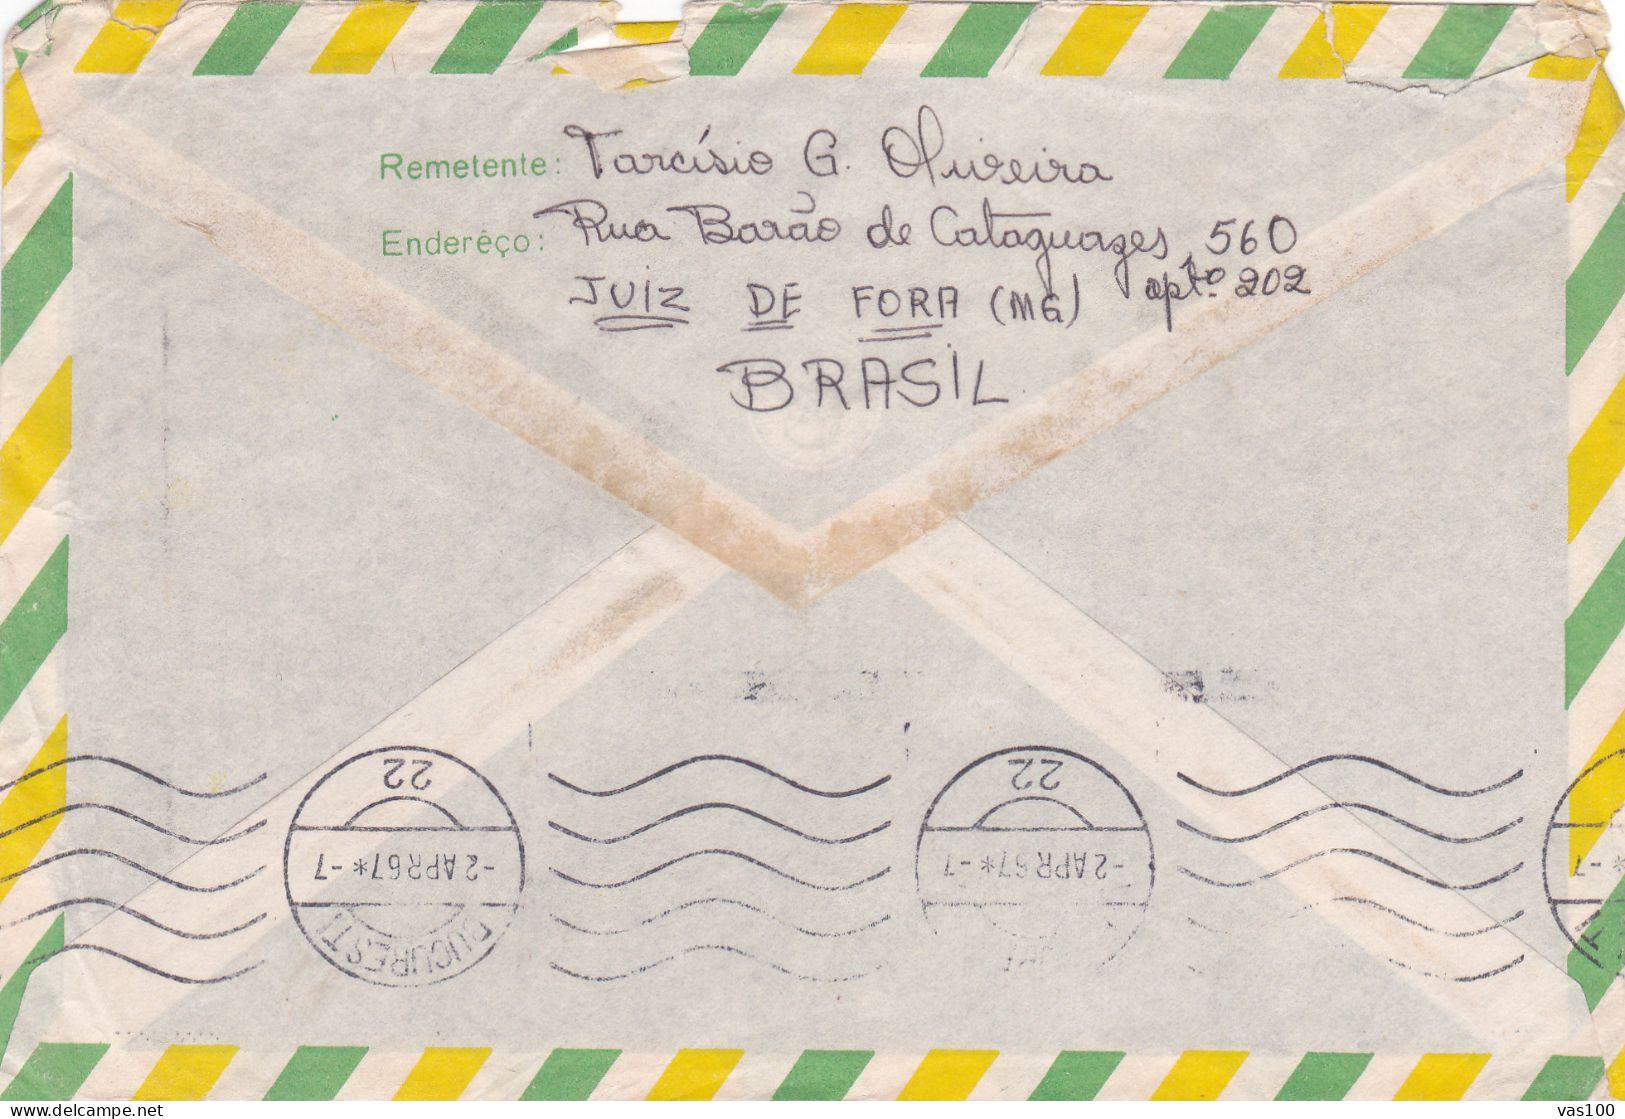 NICE FRANKING, POSTAL AEREO COVERS 1967,BRAZIL - Covers & Documents